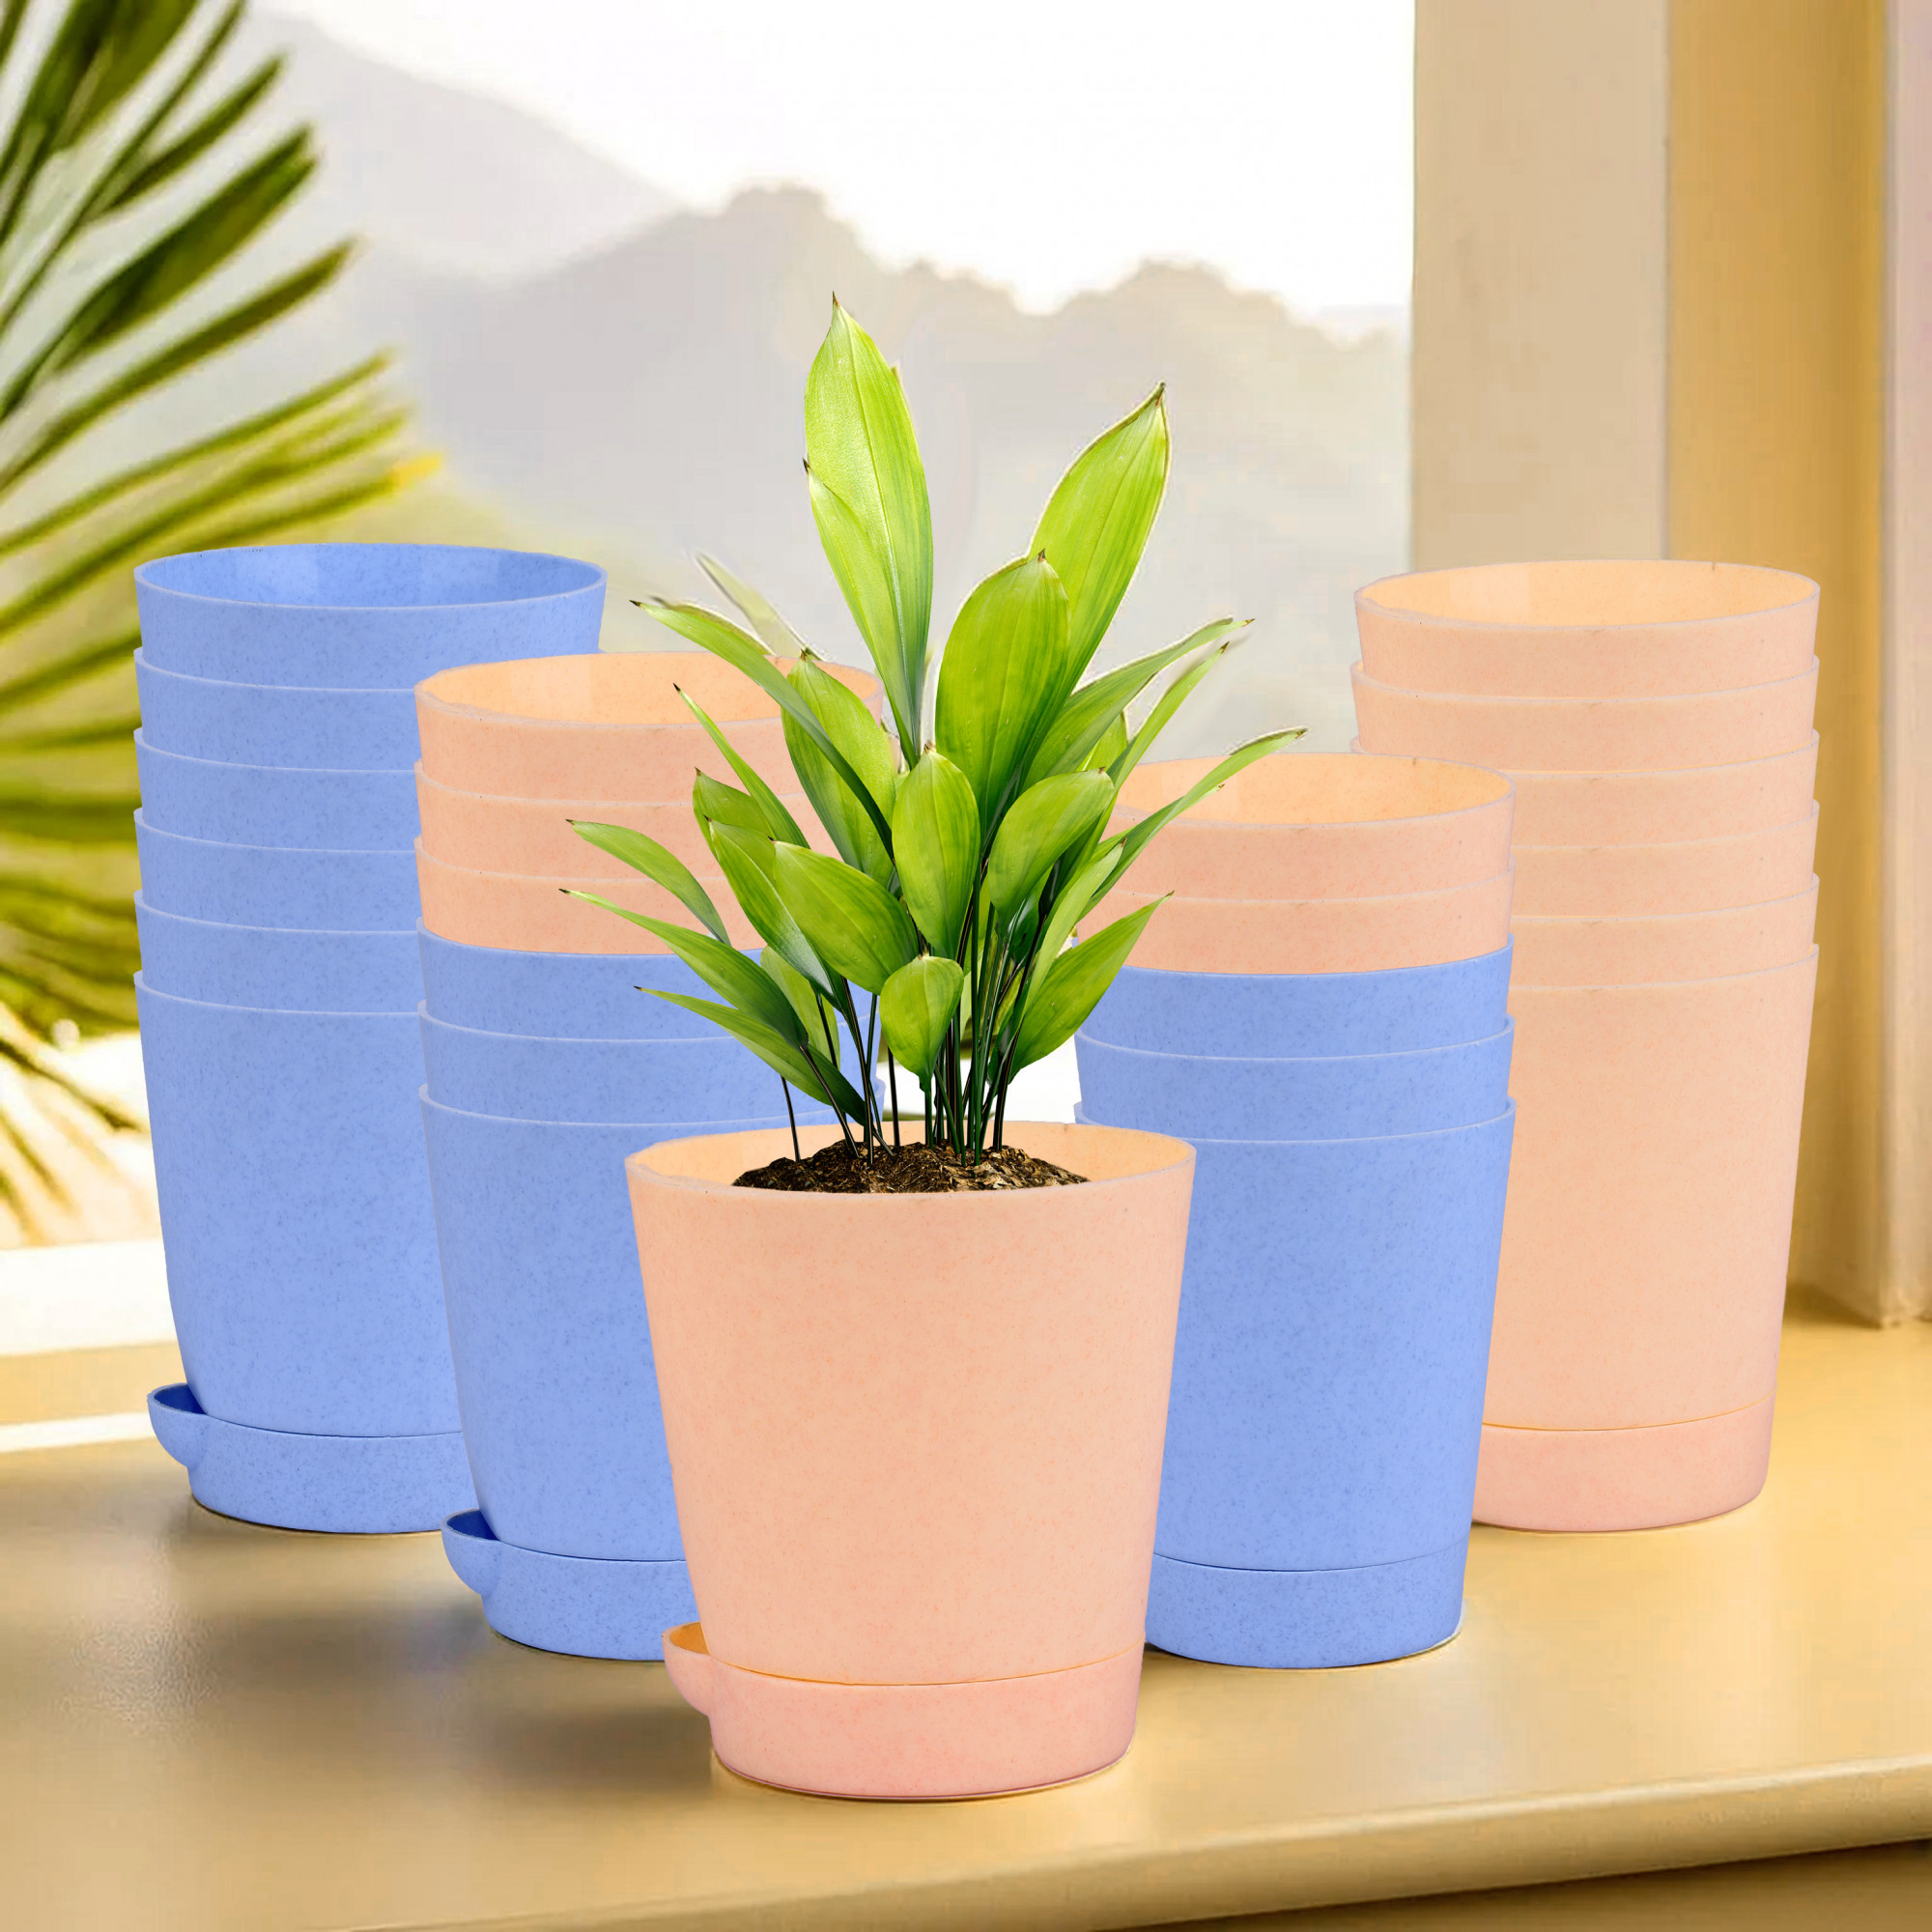 Kuber Industries Flower Pot | Flower Pot for Living Room-Office | Planters for Home-office-Lawns & Garden Décor | Self Watering Flower Planters Pots | Marble Titan | 4 Inch | Blue & Peach